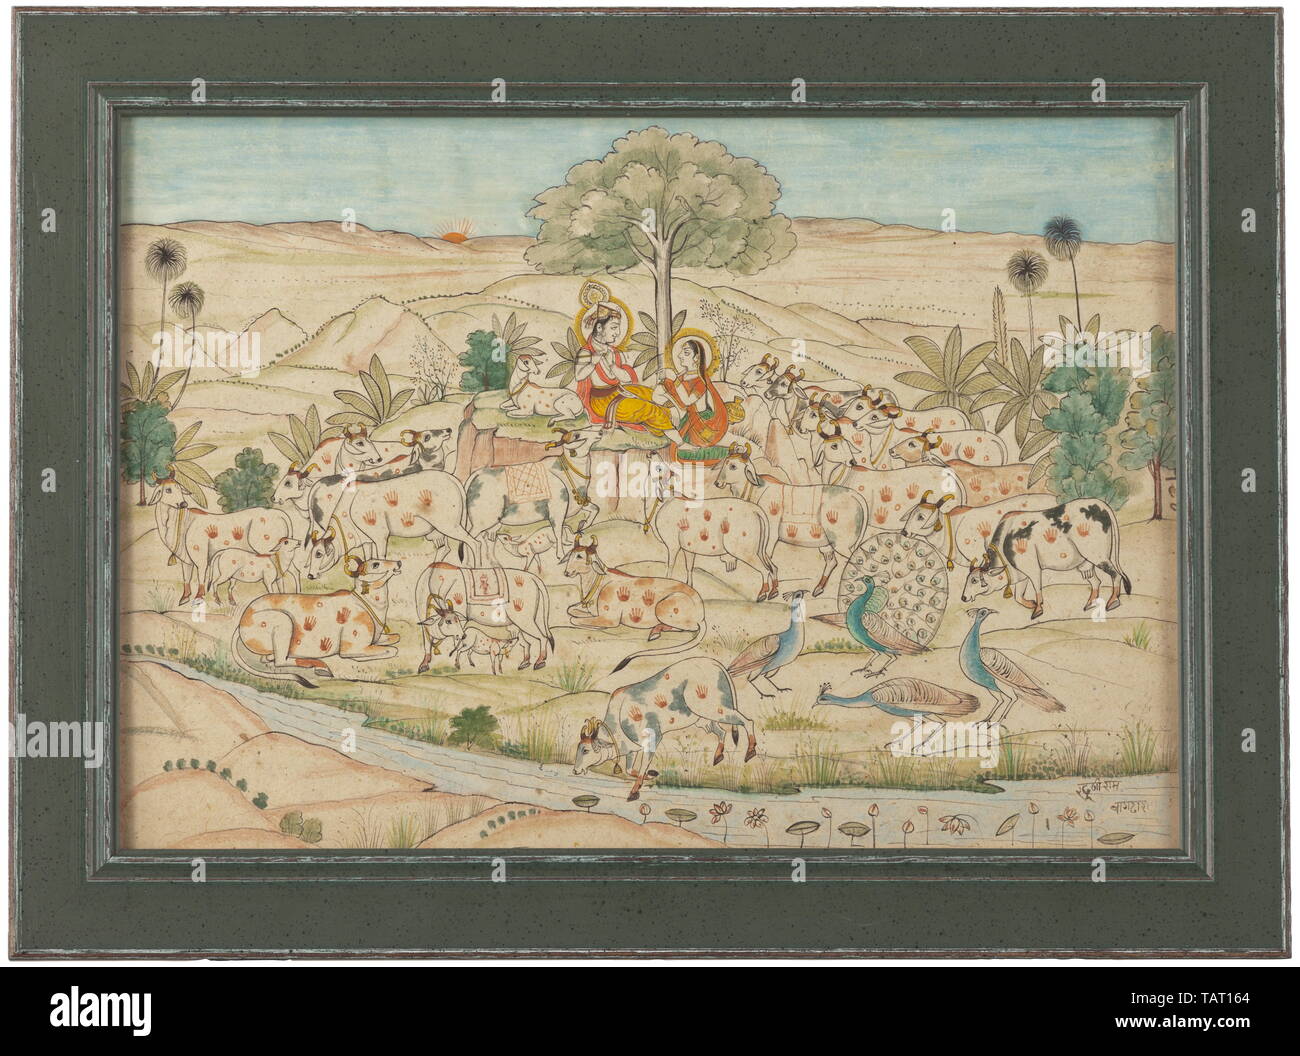 An Indian miniature, Nathadwara School, signed Kubiram Gopilal, early 20th century, Gouache on paper. Depiction of Krishna and Radha under a tree, after decorating the cows. Signed at lower right "Khubiram Gopilal". Framed and under glass. Dimensions of frame 29.5 x 39.5 cm. historic, historical, Additional-Rights-Clearance-Info-Not-Available Stock Photo